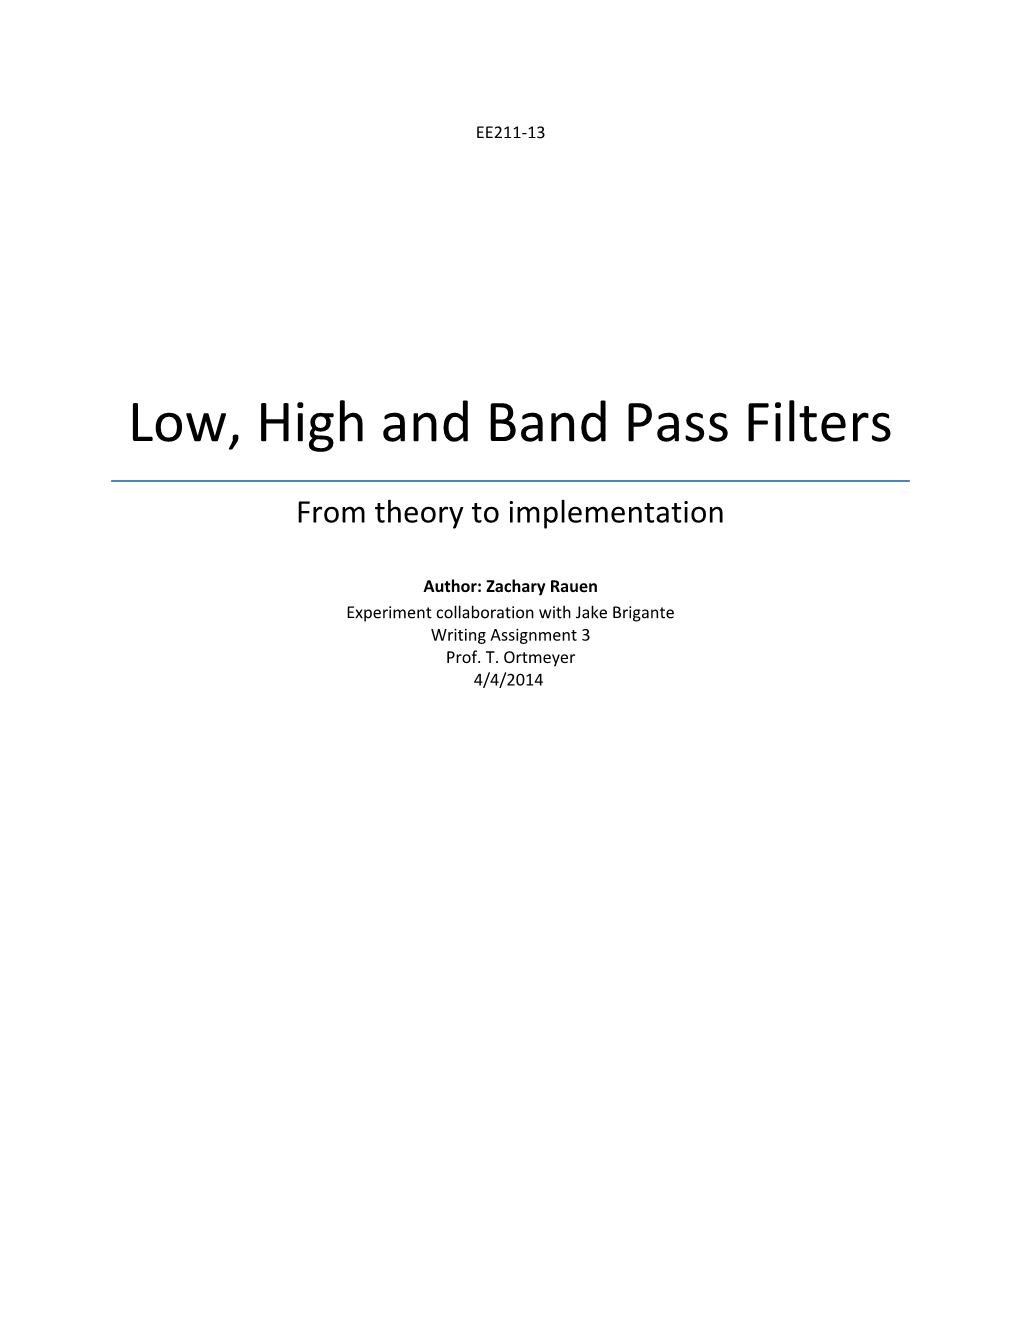 Low, High and Band Pass Filters